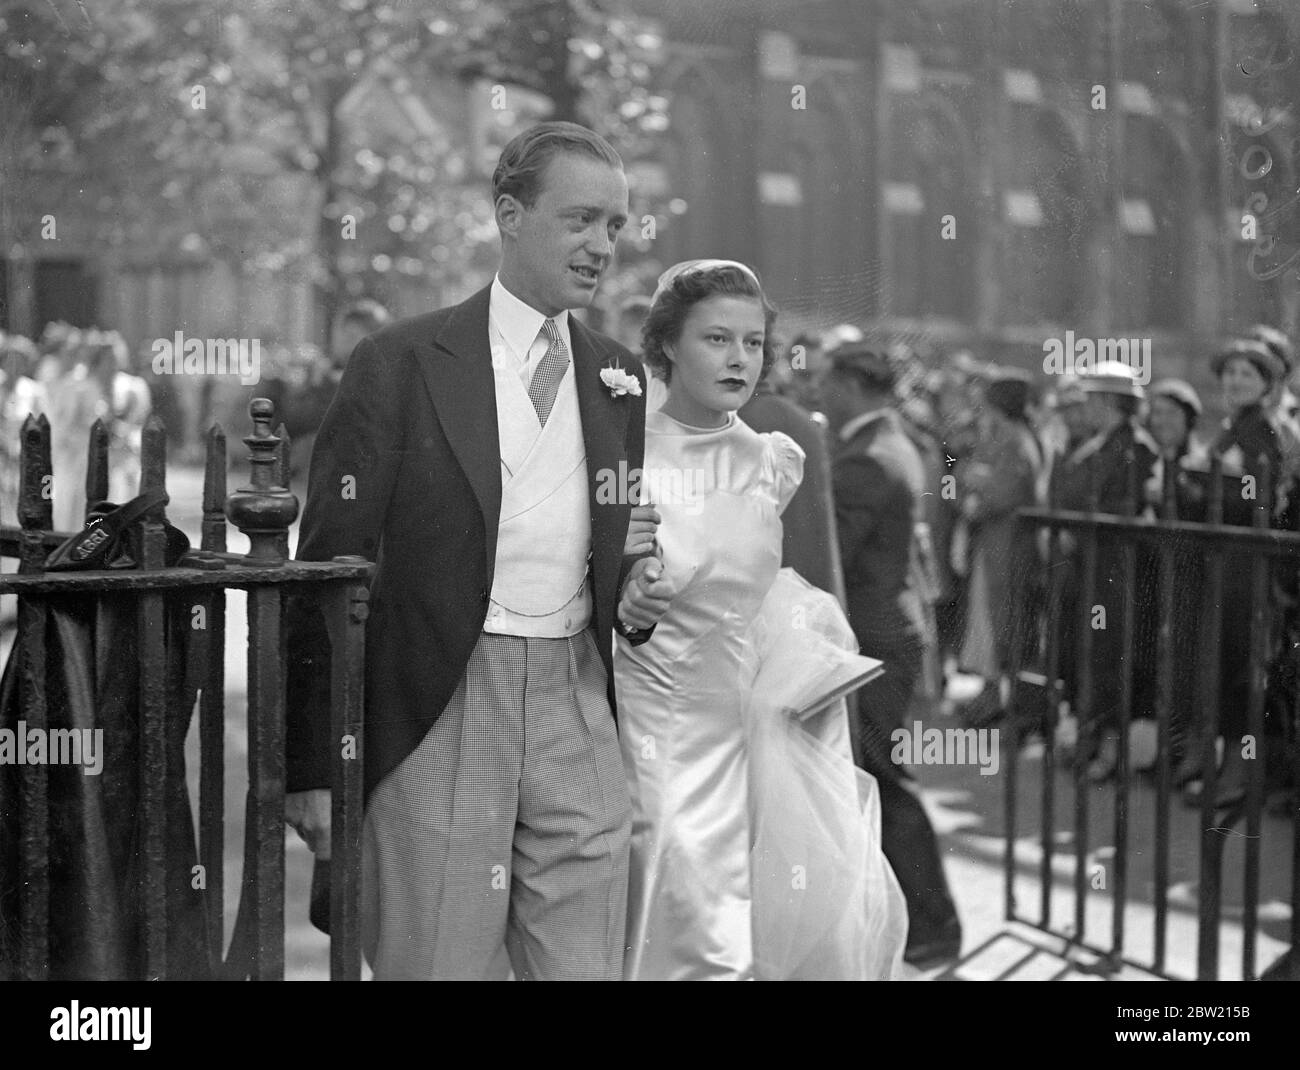 Miss Felicity Bailey, younger daughter of Lady Janet Bailey was married to Anthony Rumbold, of the Diplomatic Service, at St Margaret's Church, Westminster. The bride was given away by her father Lieutenant Colonel F. G. Bailey. The bride and groom leaving after the wedding. 29 June 1937 Stock Photo